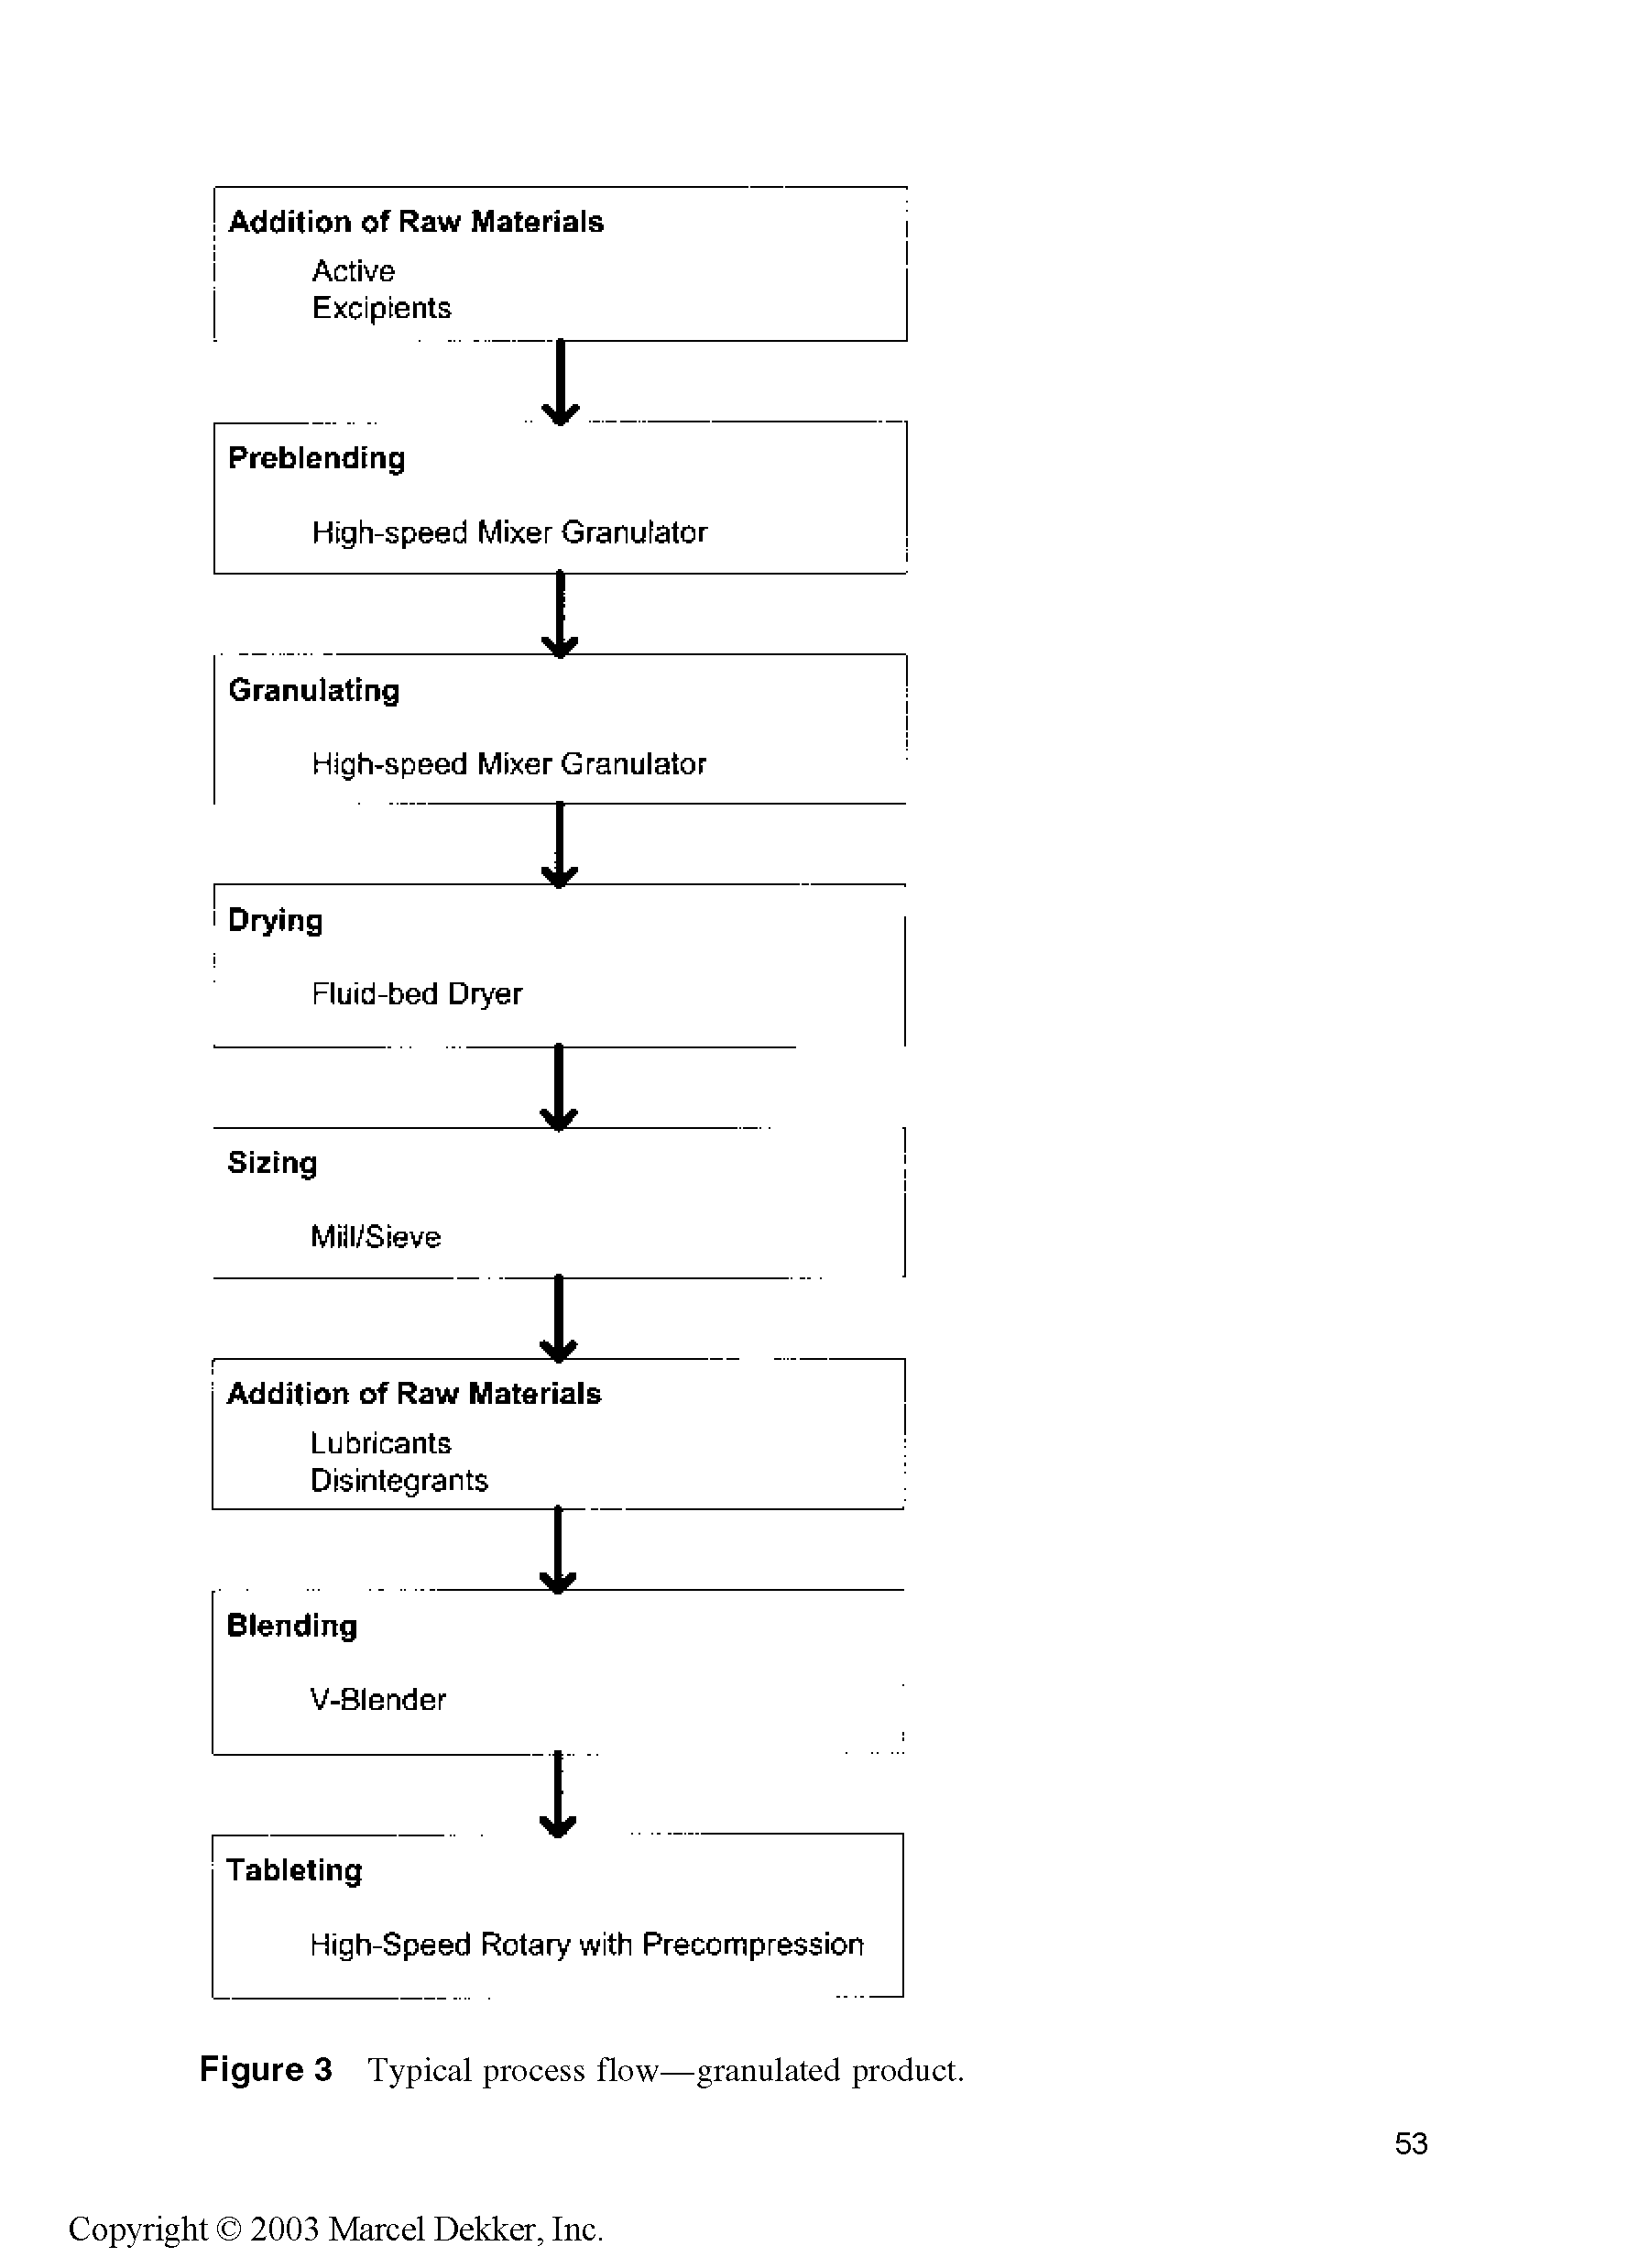 Figure 3 Typical process flow—granulated product.